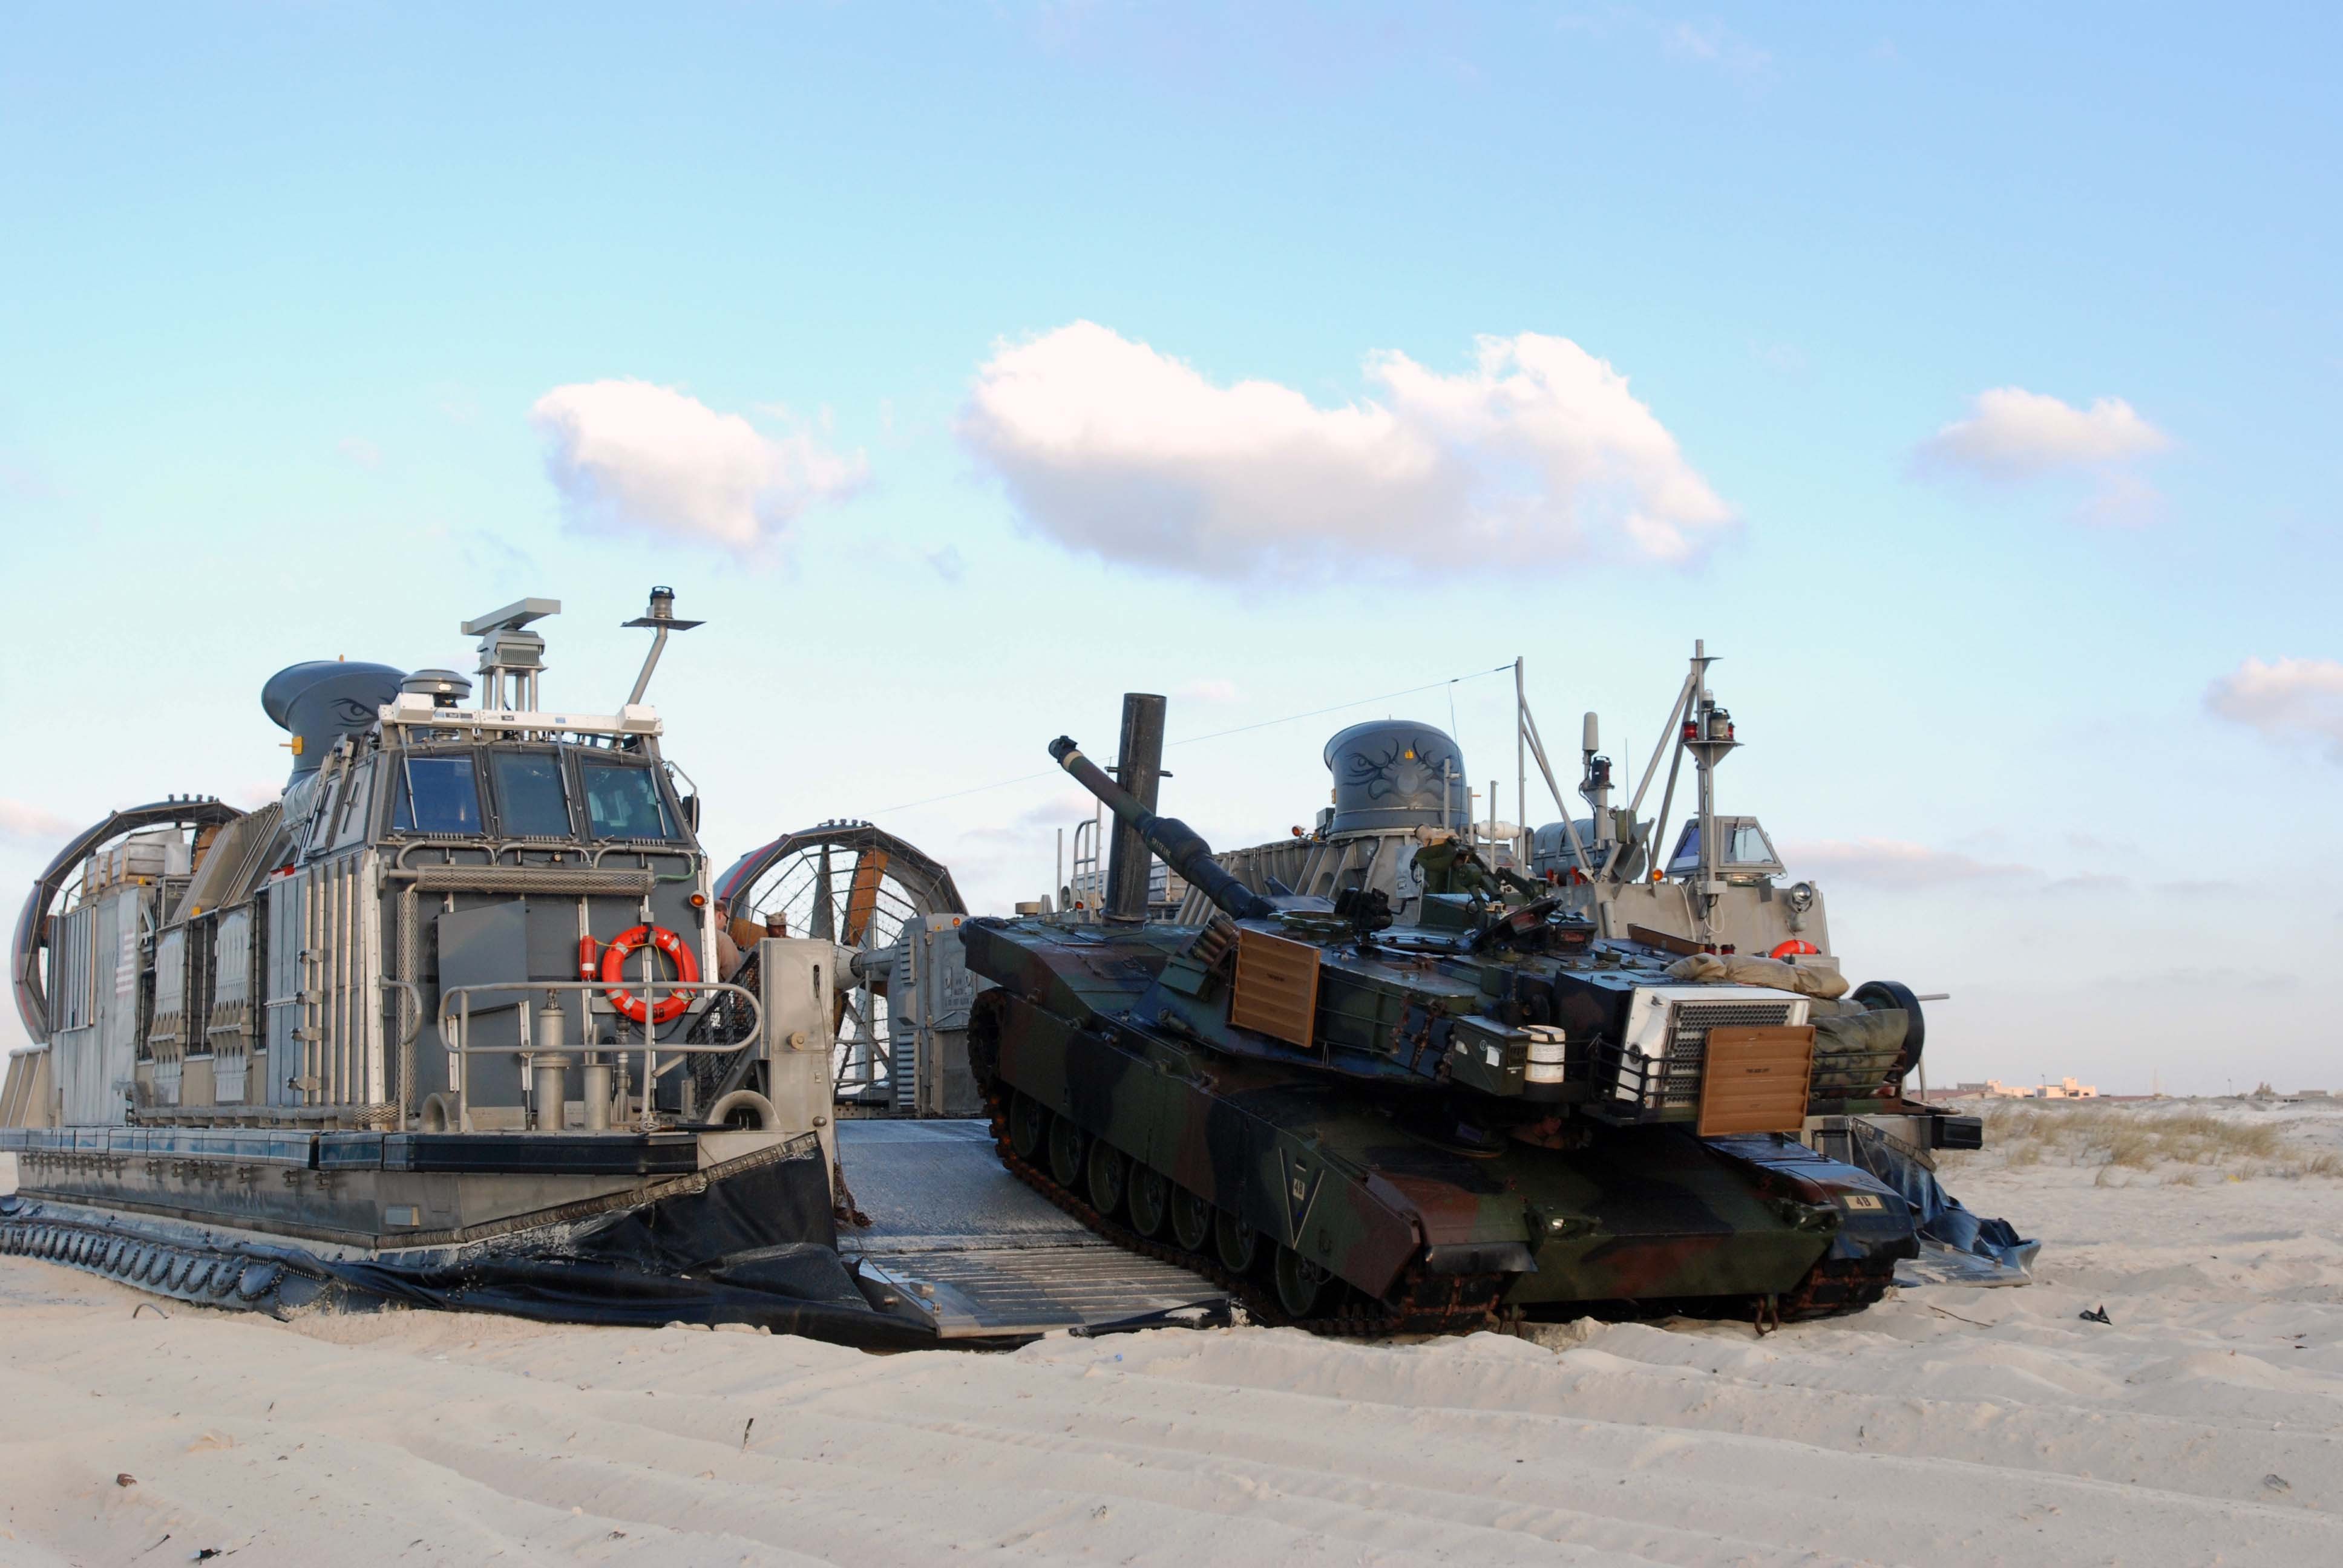 Bright_Star_2009_participants_conduct_Amphibious_Operations_Exercise_DVIDS213123.jpg